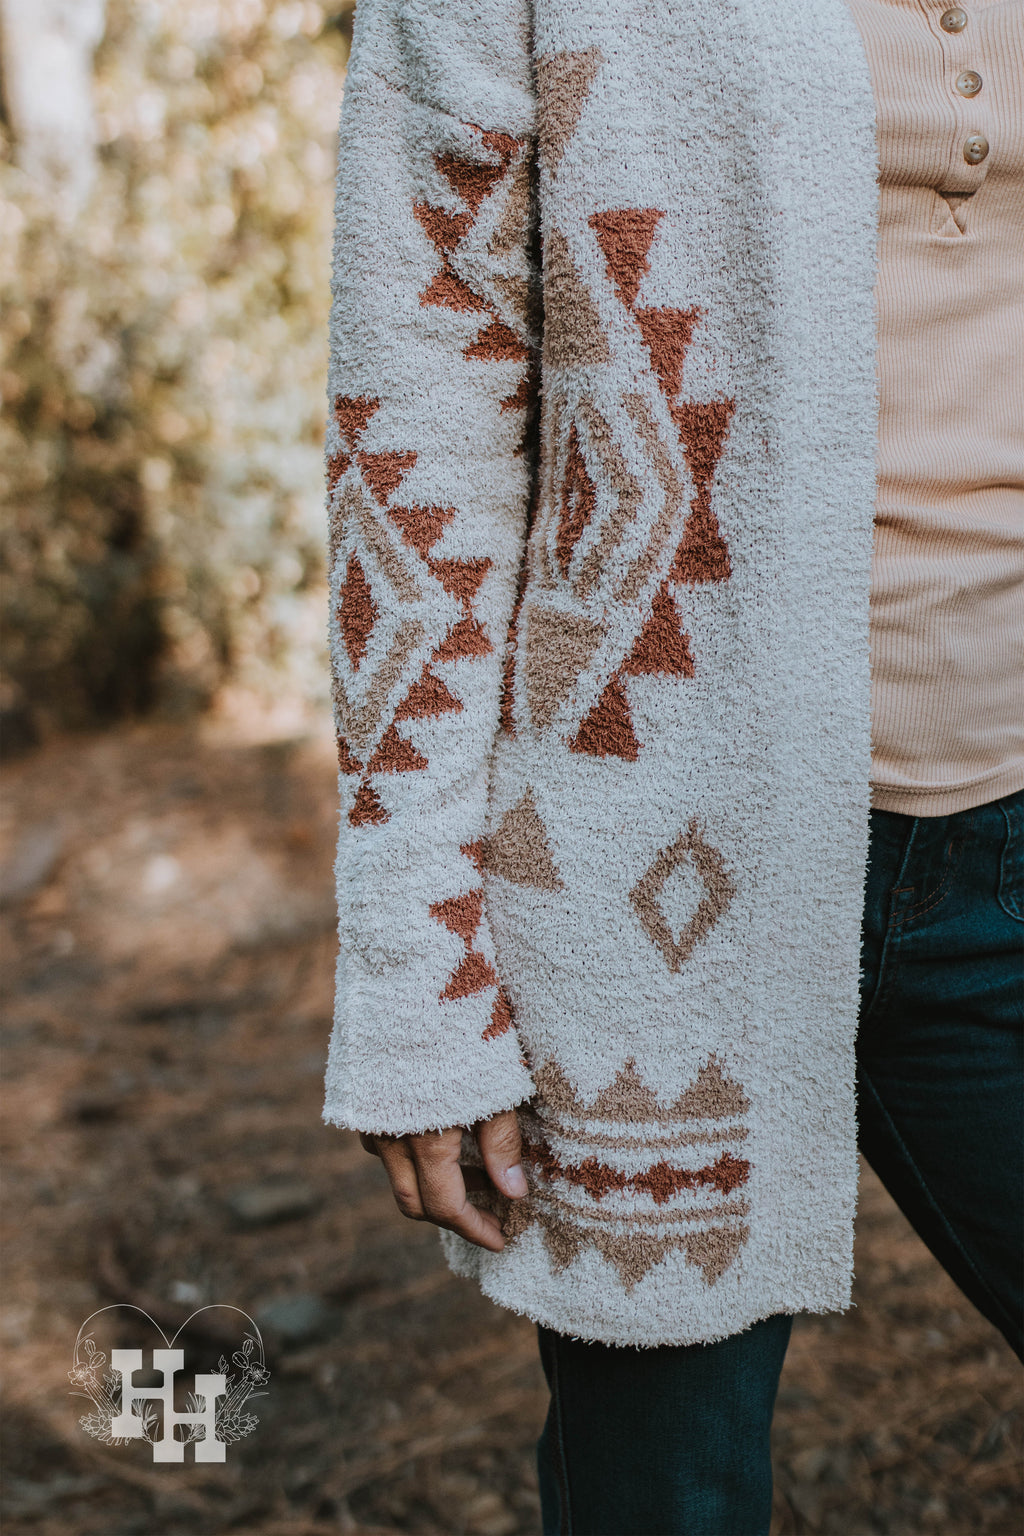 Close up of aztec sweater. Sweater is off white or ivory with an aztec print in burn orange and tan. The cardigan also has a little bit of a fuzzy texture.